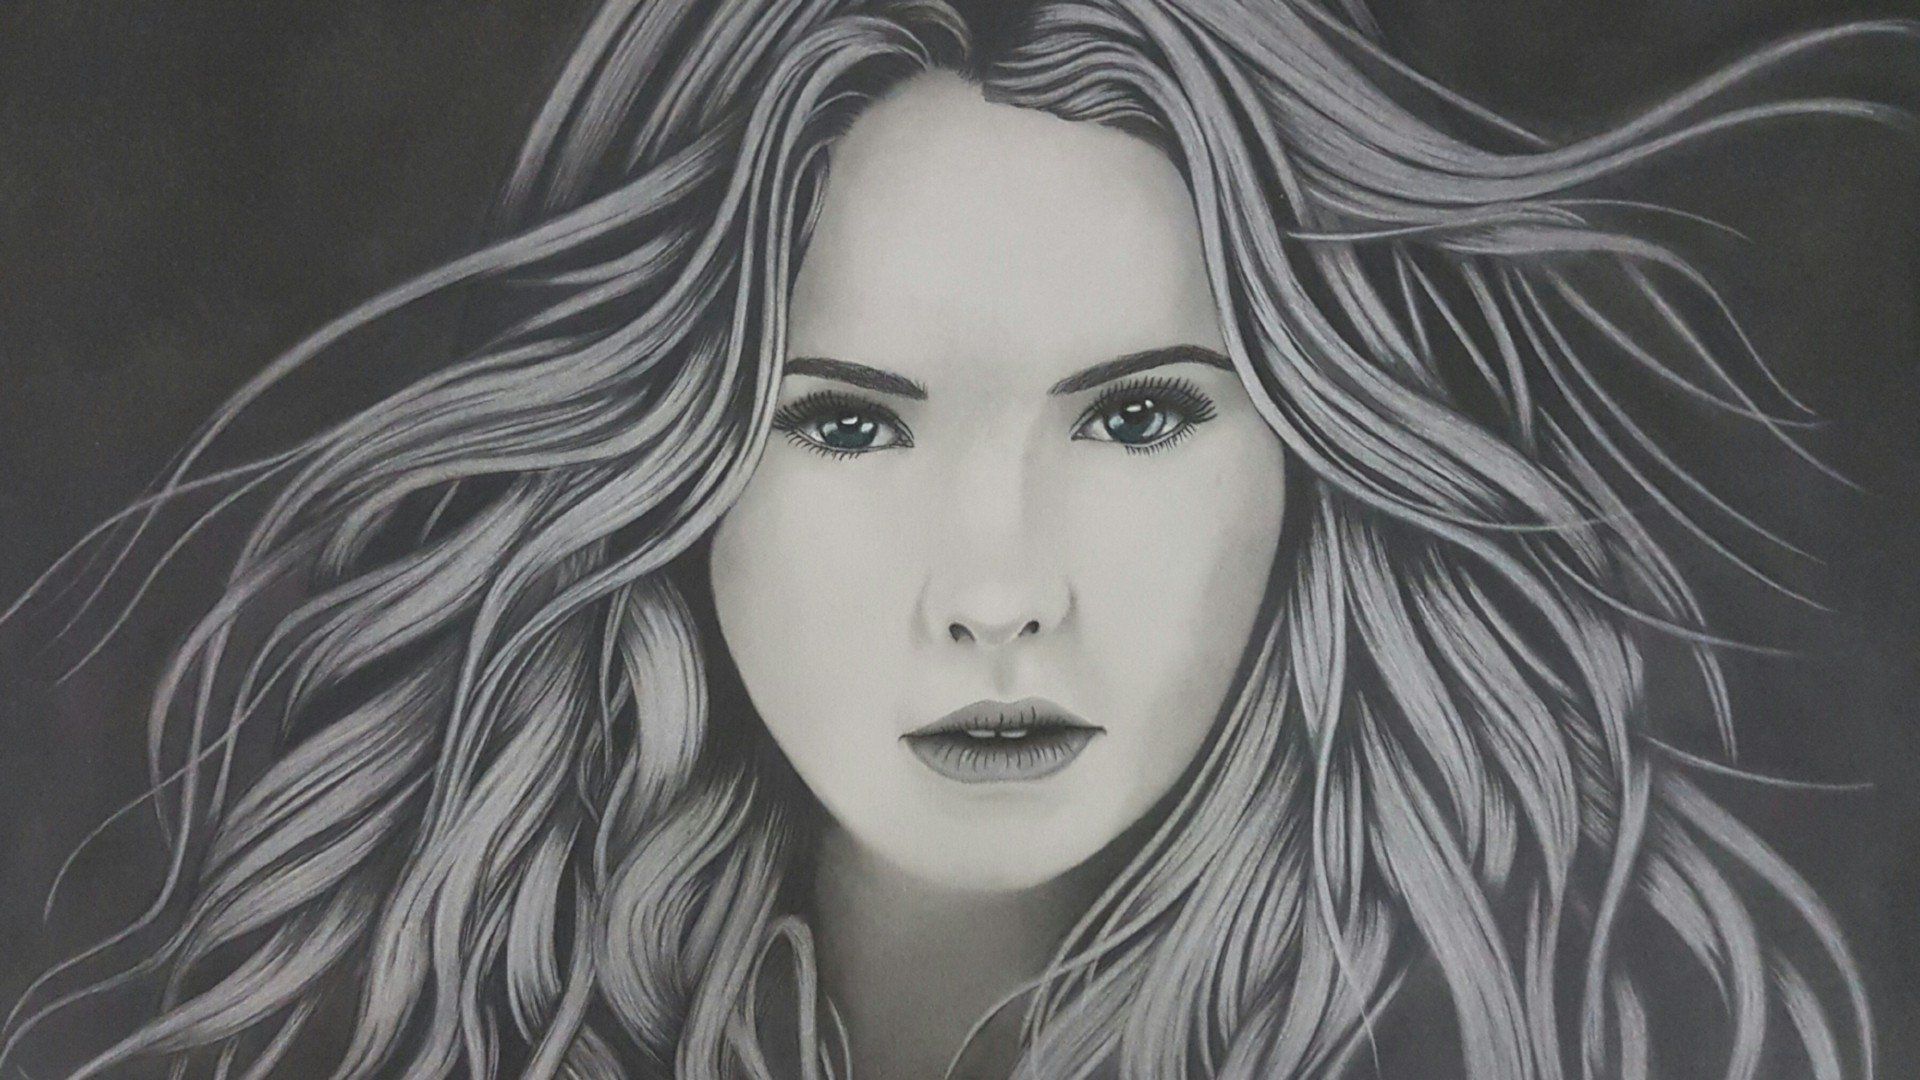 40 Truly Awesome Celebrity Drawings